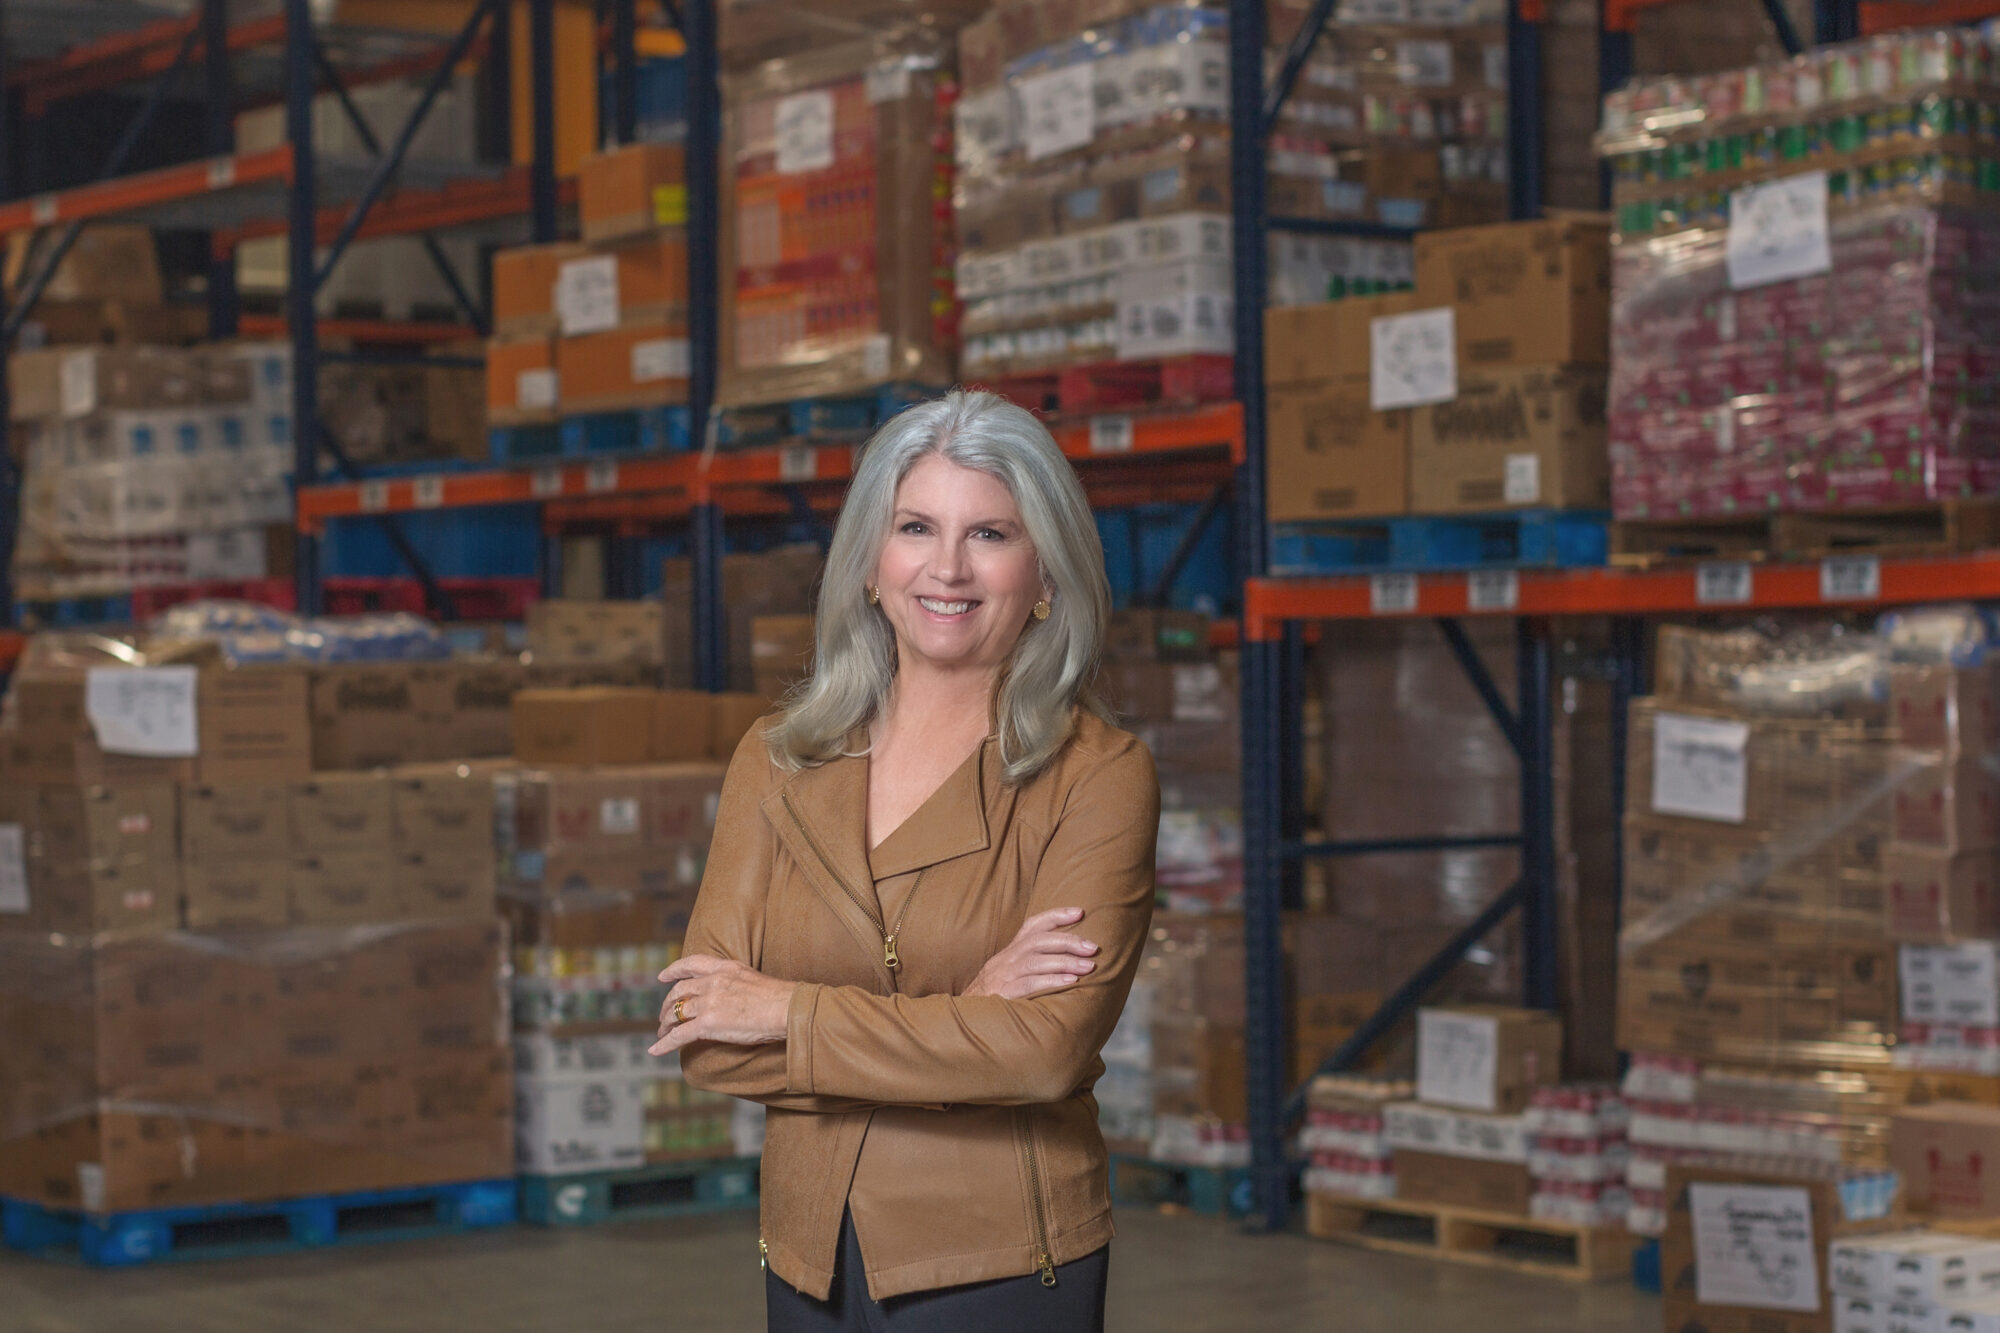 Sandra Frank has transformed the fight to end hunger in the Suncoast